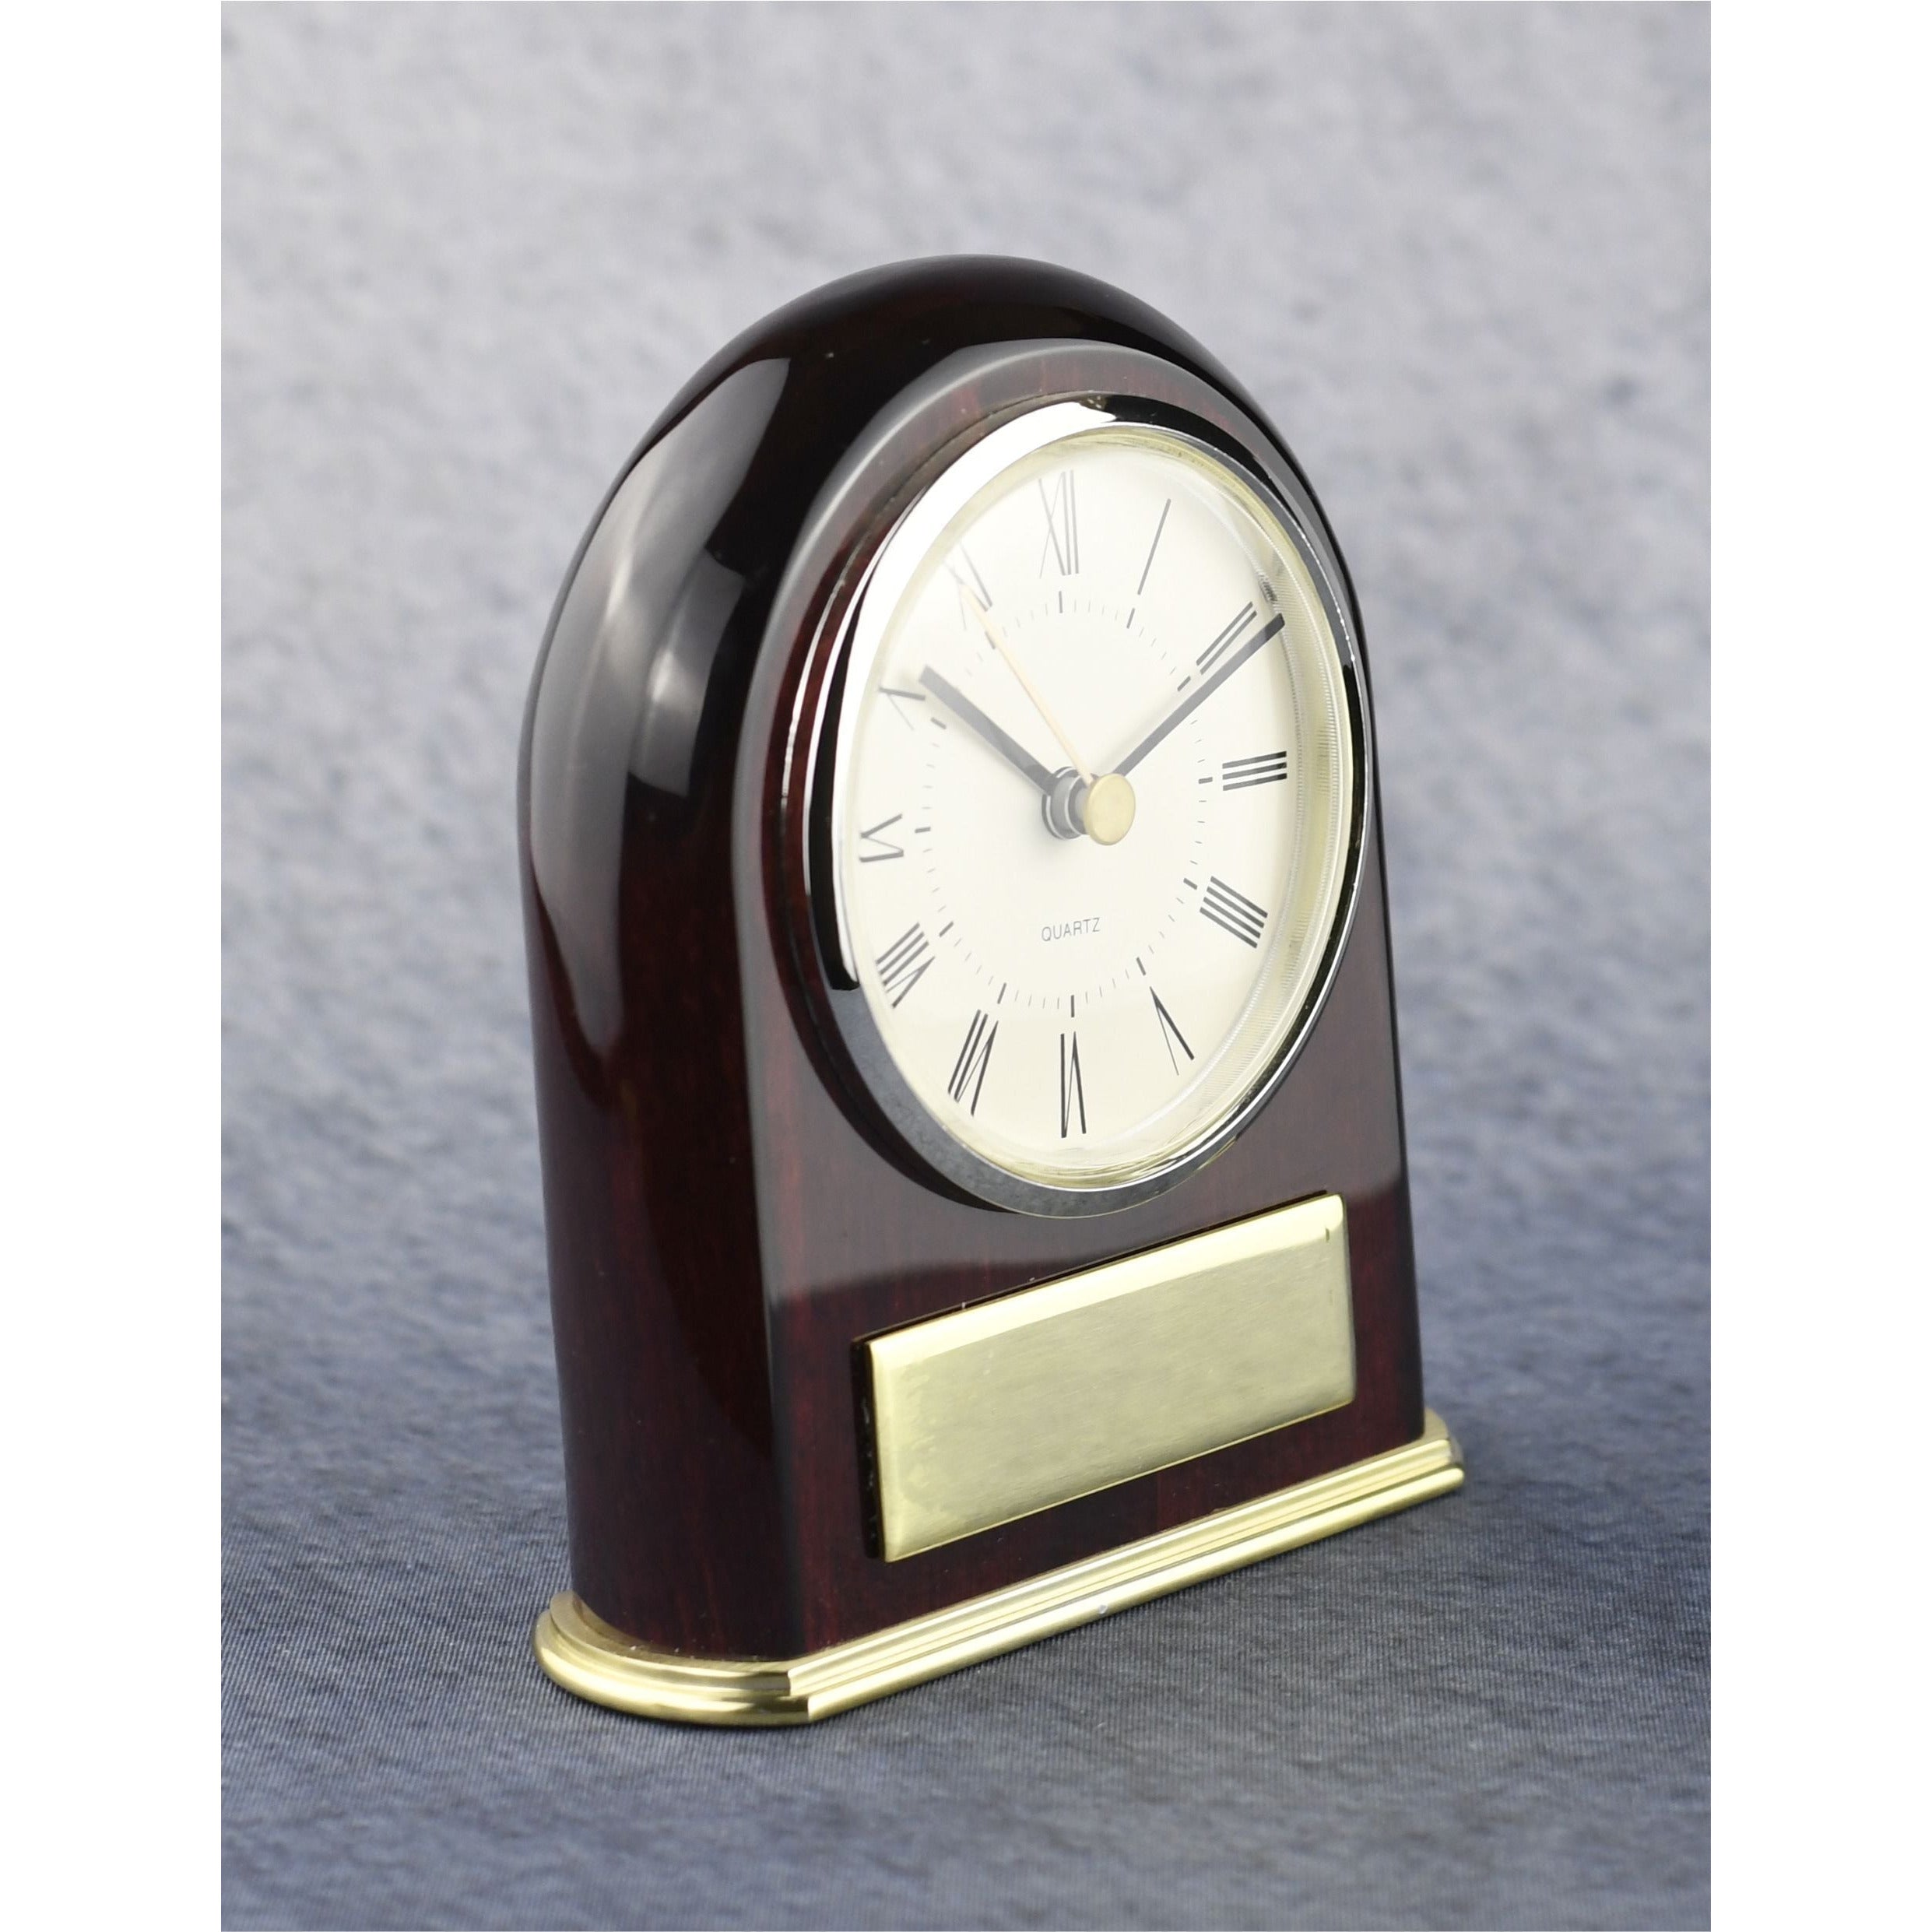 Clock Framed With Rosewood And Brass | Alliance Awards LLC.